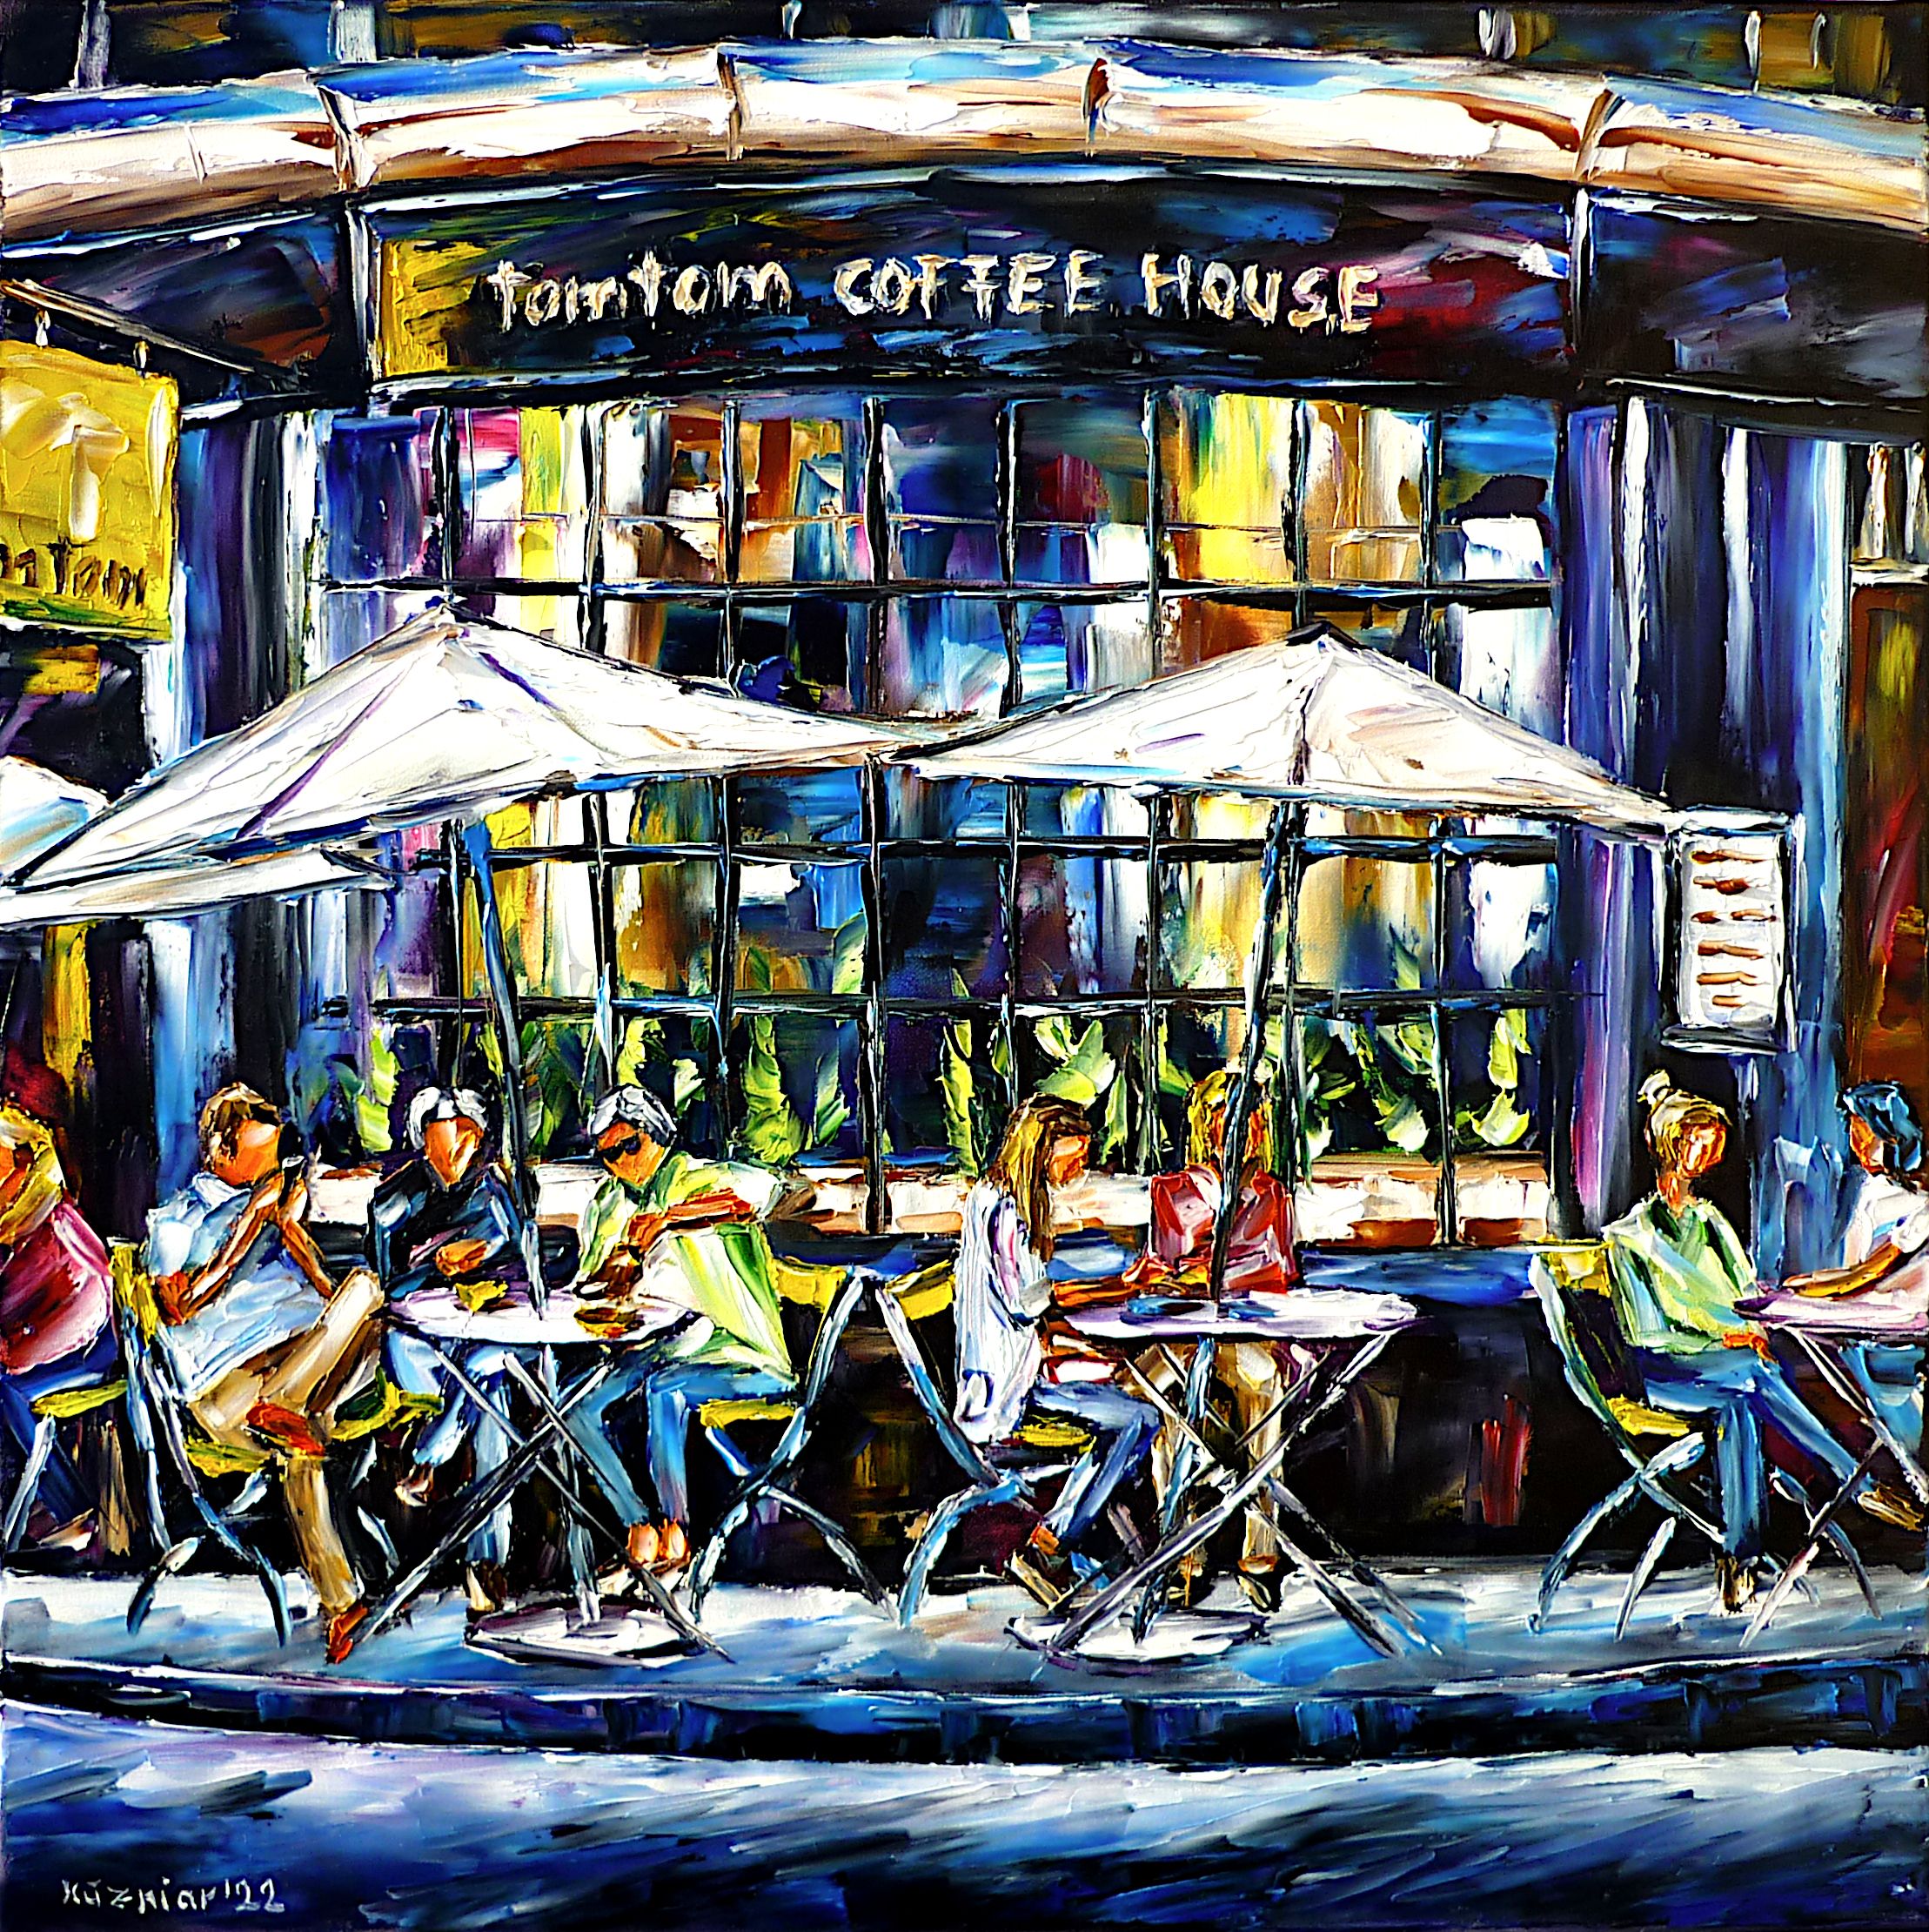 london cafe,pub in london,tomtom painting,people in cafe,sitting in cafe,street cafe in london,cafe exterior,sitting outside,cafe scene,cafe painting,london Elizabeth Street,corner cafe,london Ebury Street,london coffee house,summer in london,cafe parasols,people in london,people in summer,summer painting,summer picture,london lifestyle,london city scene,london cityscape,beautiful london,london love,london lovers,i love london,london abstract,london's beauty,square format,square picture,square painting,palette knife oil painting,modern art,impressionism,expressionism,abstract painting,lively colors,colorful painting,bright colors,light reflections,impasto painting,figurative